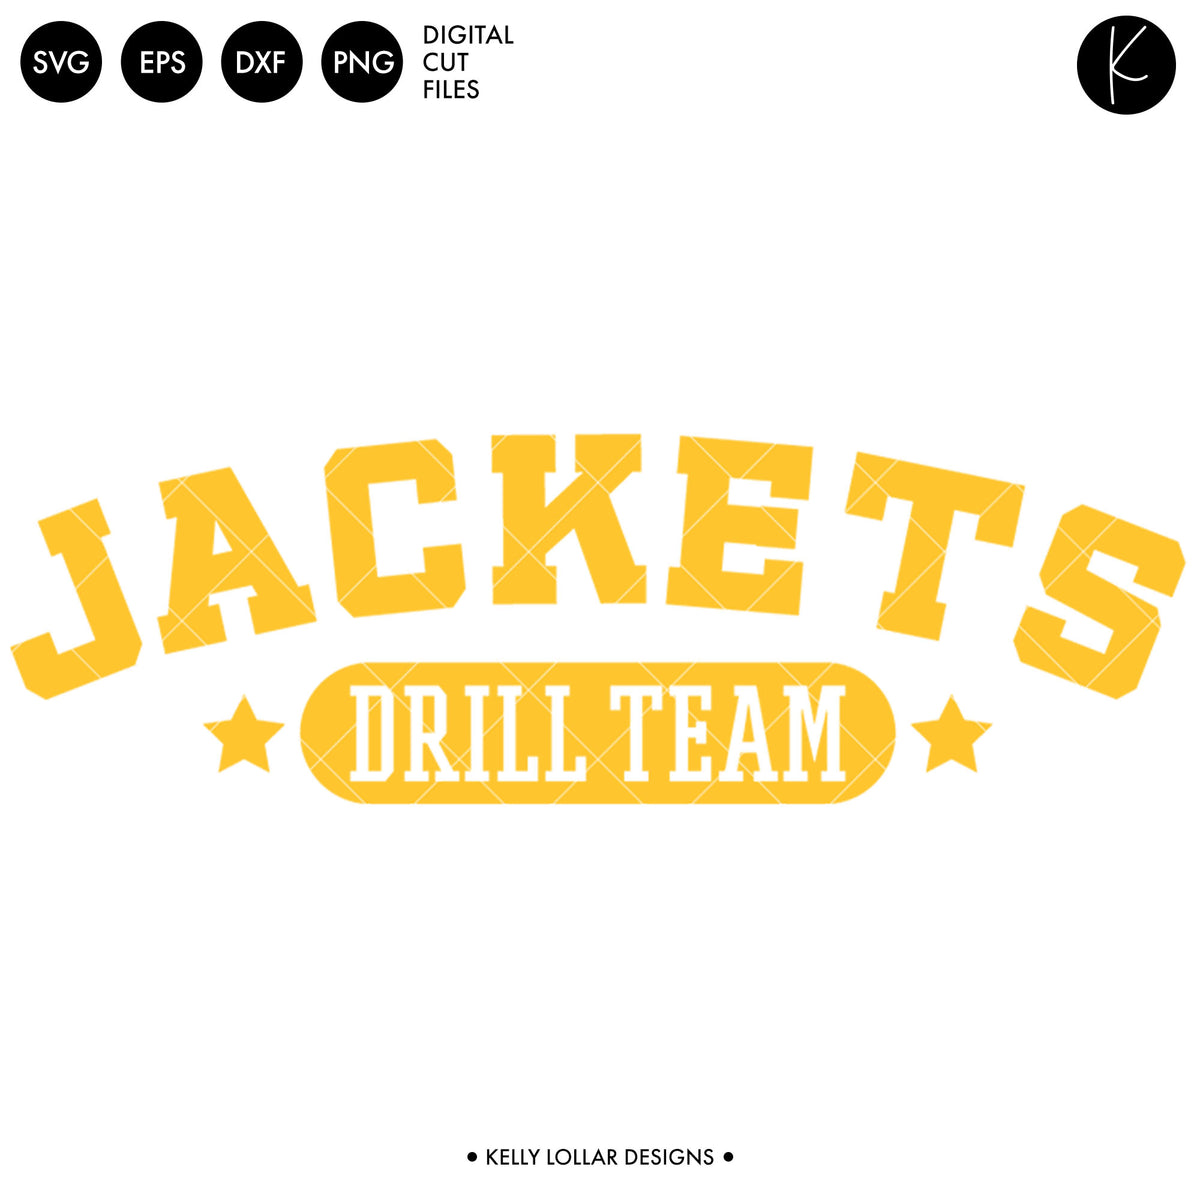 Jackets Drill Bundle | SVG DXF EPS PNG Cut Files